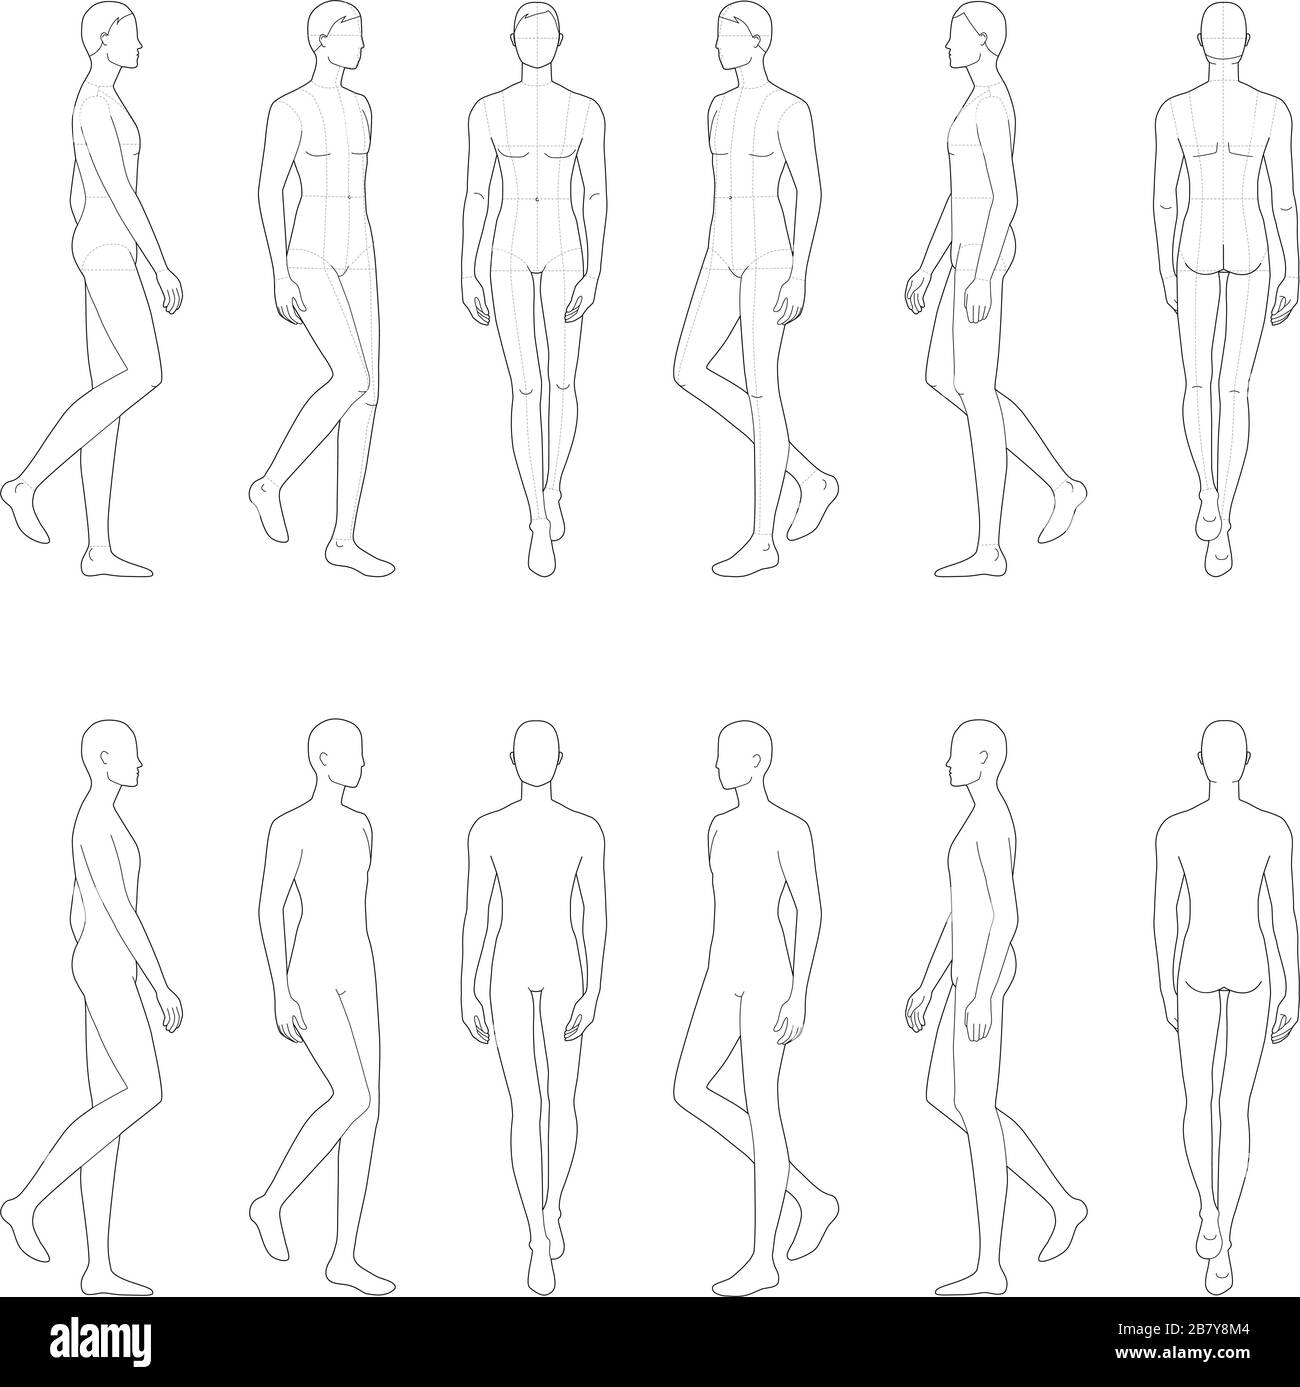 14,876 Man Back View Sketch Images, Stock Photos, 3D objects, & Vectors |  Shutterstock